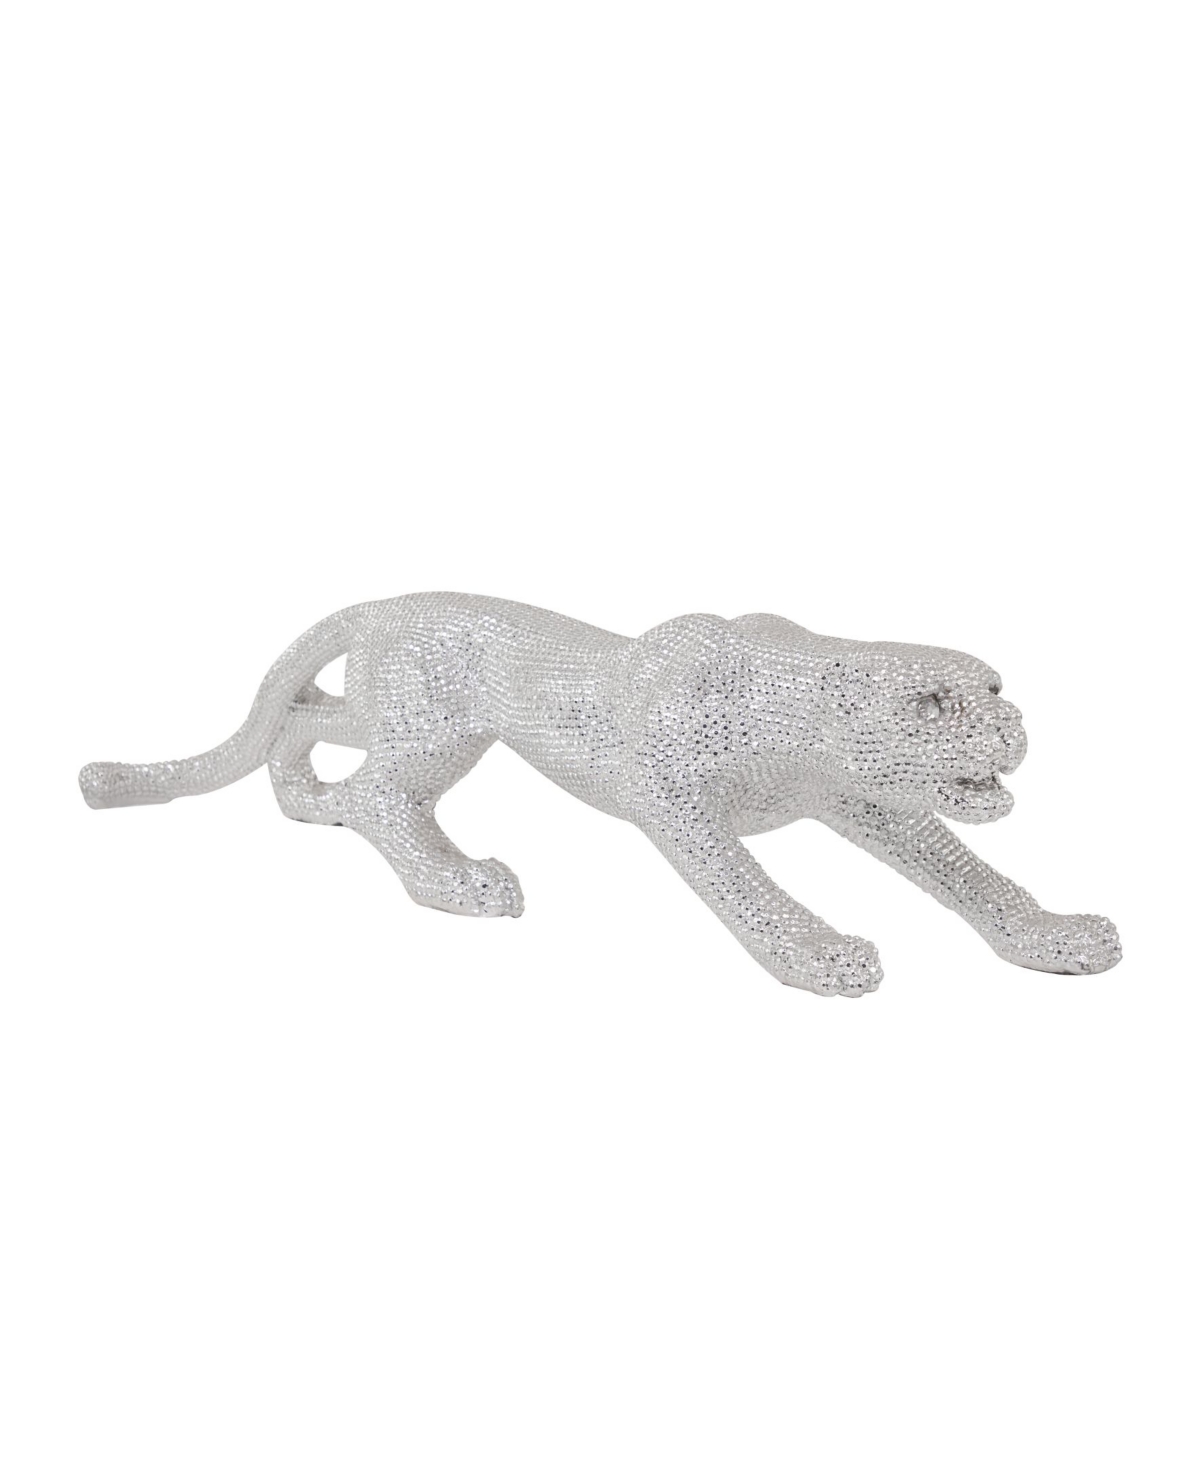 Rosemary Lane Glam Leopard Sculpture, 11" X 42" In Silver-tone